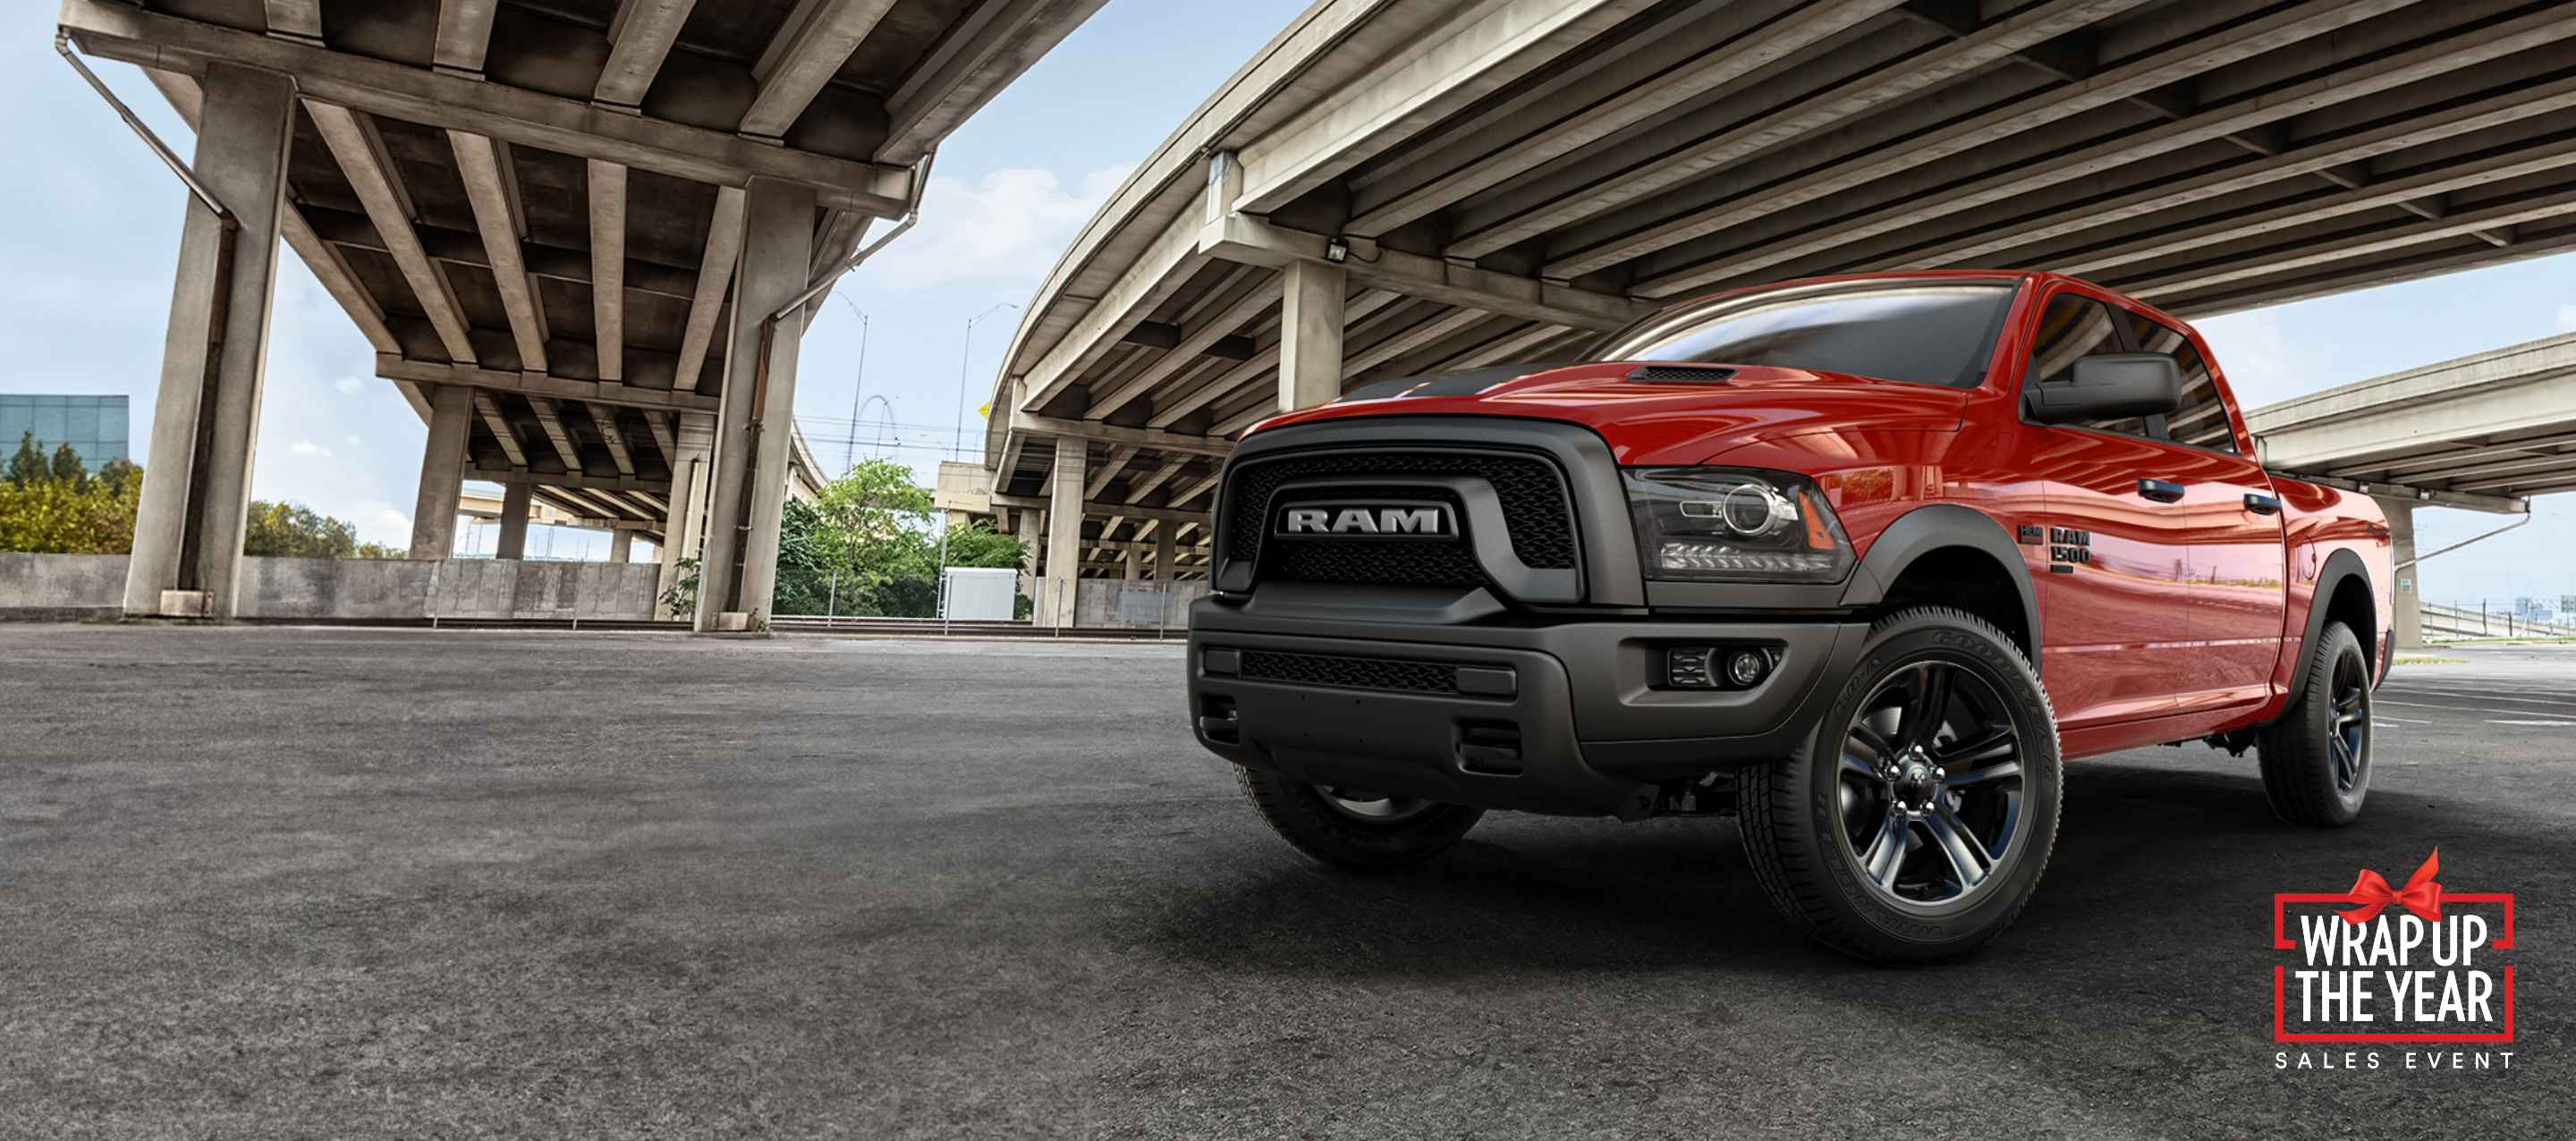 A red 2023 Ram 1500 Classic Warlock 4x4 Crew Cab parked under a group of freeway overpasses. Ram Wrap Up the Year Sales Event.